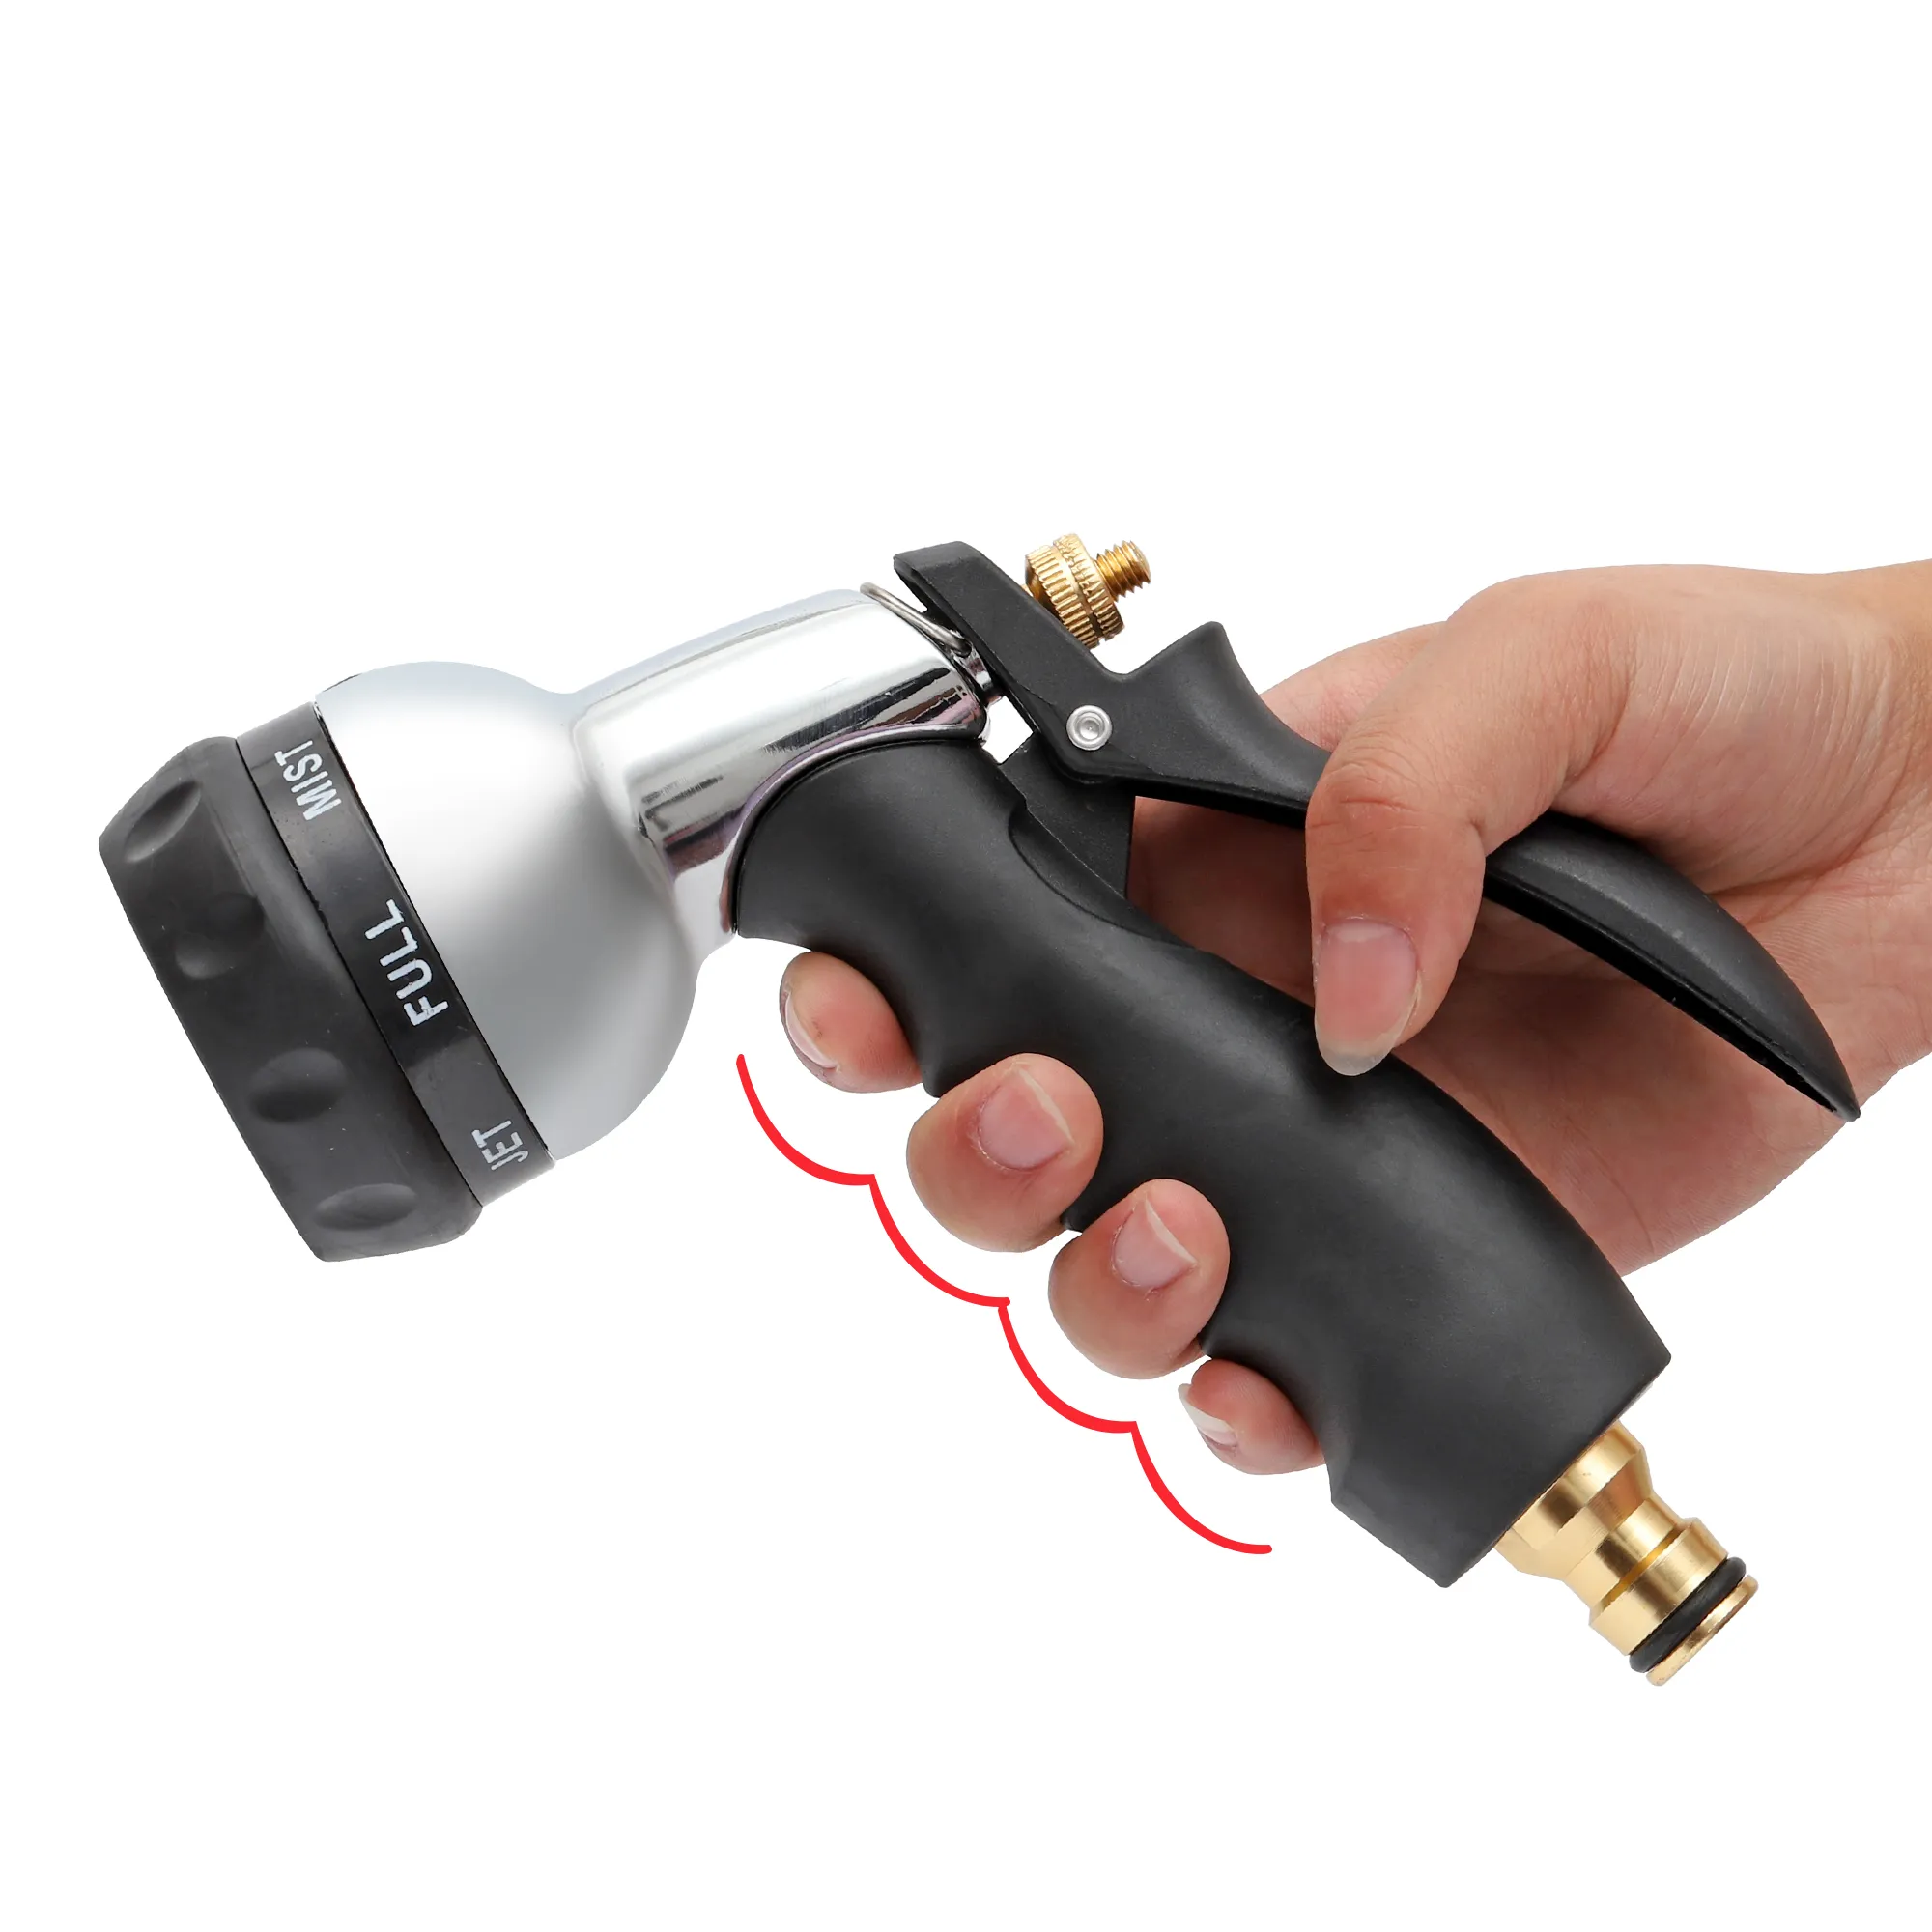 7 Watering Modes Garden Hose Nozzle, made of alloy with soft rubber coating, Ergonomic and Comfortable Handle